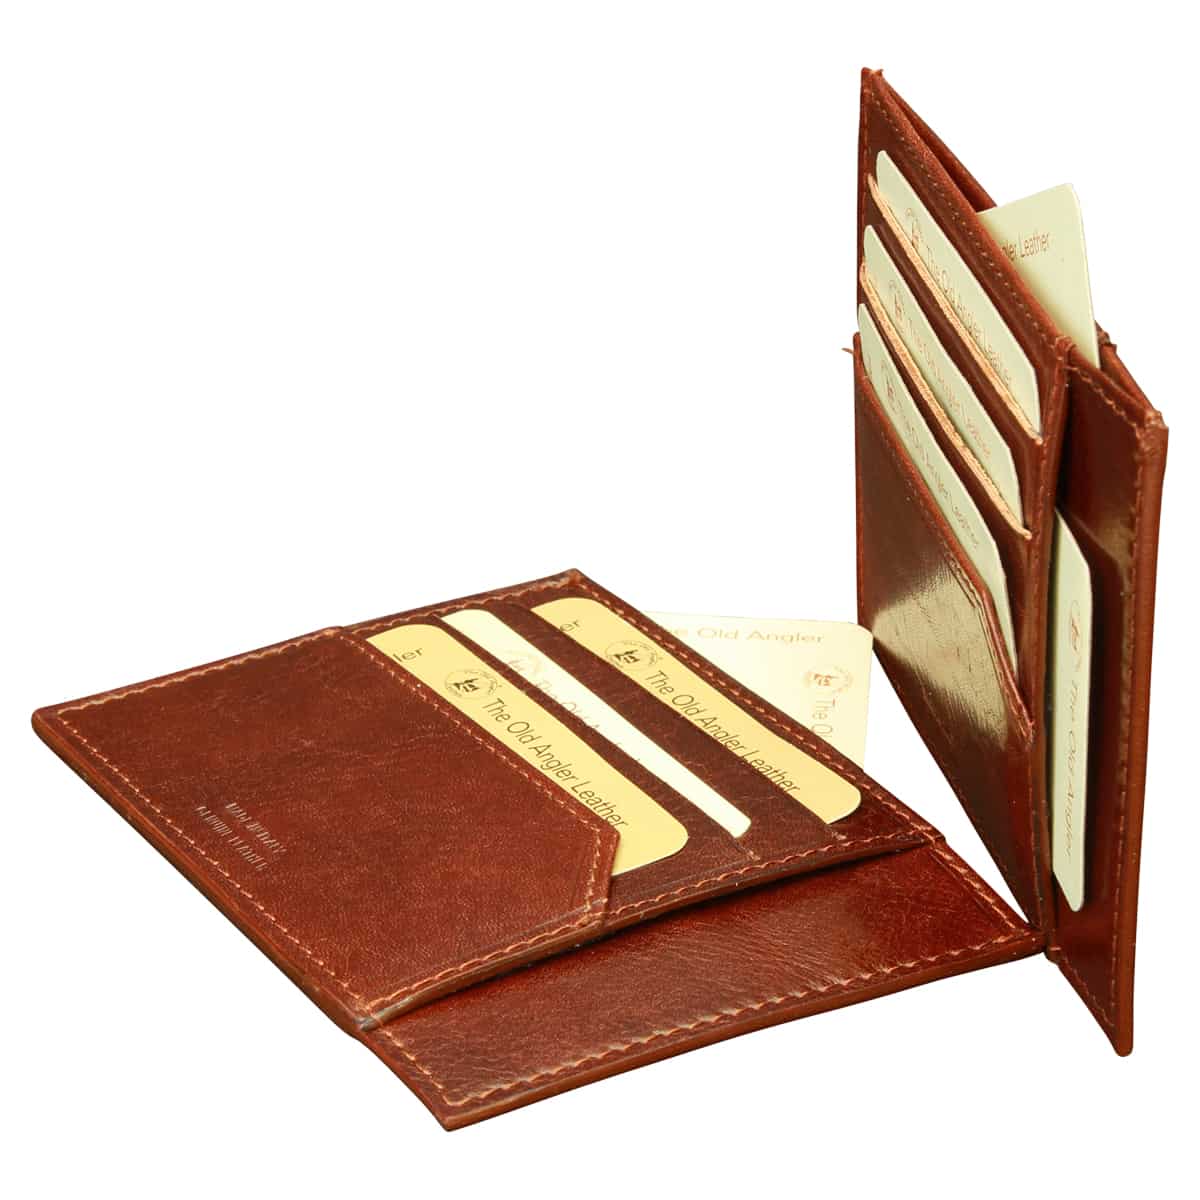 Italian leather credit card holder - Brown | 804005MA UK | Old Angler Firenze